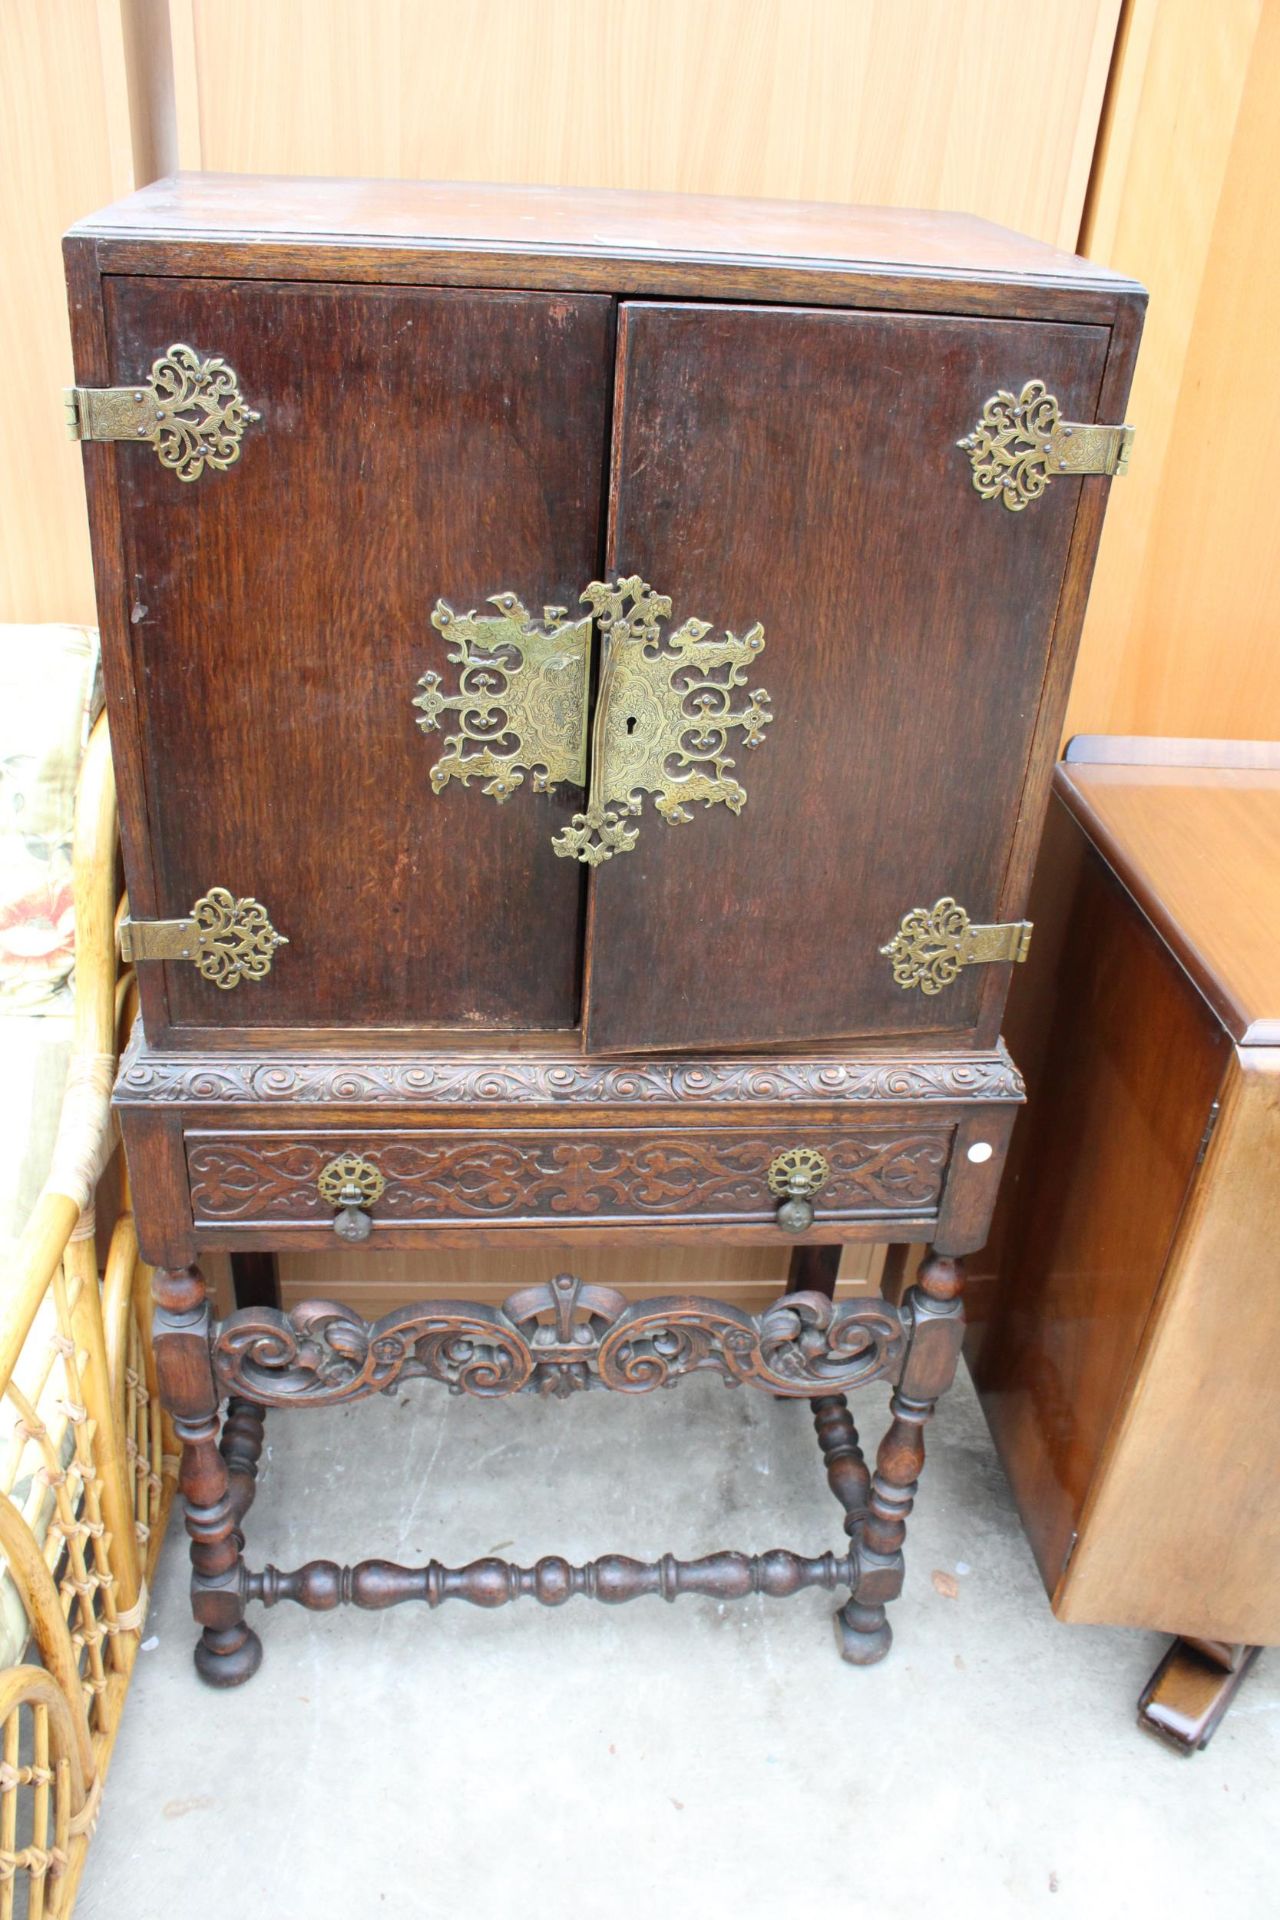 AN EARLY 20TH CENTURY OAK JACOBEAN STYLE COCKTAIL CABINET ENCLOSING SLIDES AND A SINGLE DRAWER ON